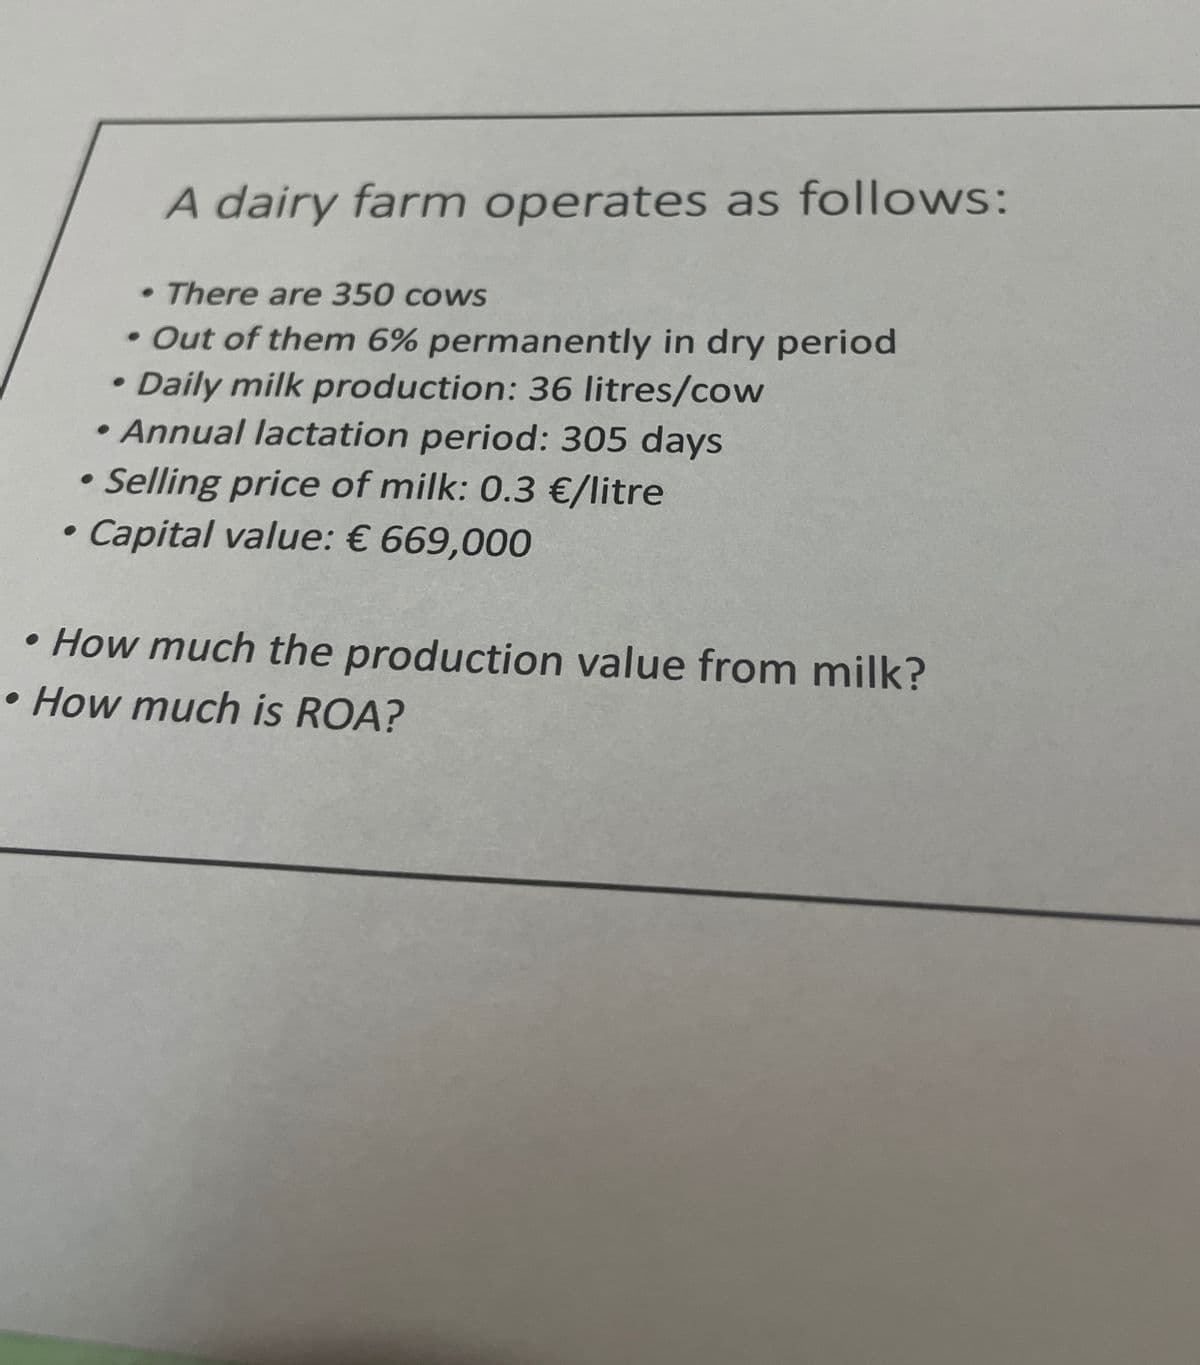 .
A dairy farm operates as follows:
• There are 350 cows
• Out of them 6% permanently in dry period
Daily milk production: 36 litres/cow
• Annual lactation period: 305 days
Selling price of milk: 0.3 €/litre
• Capital value: € 669,000
•How much the production value from milk?
How much is ROA?